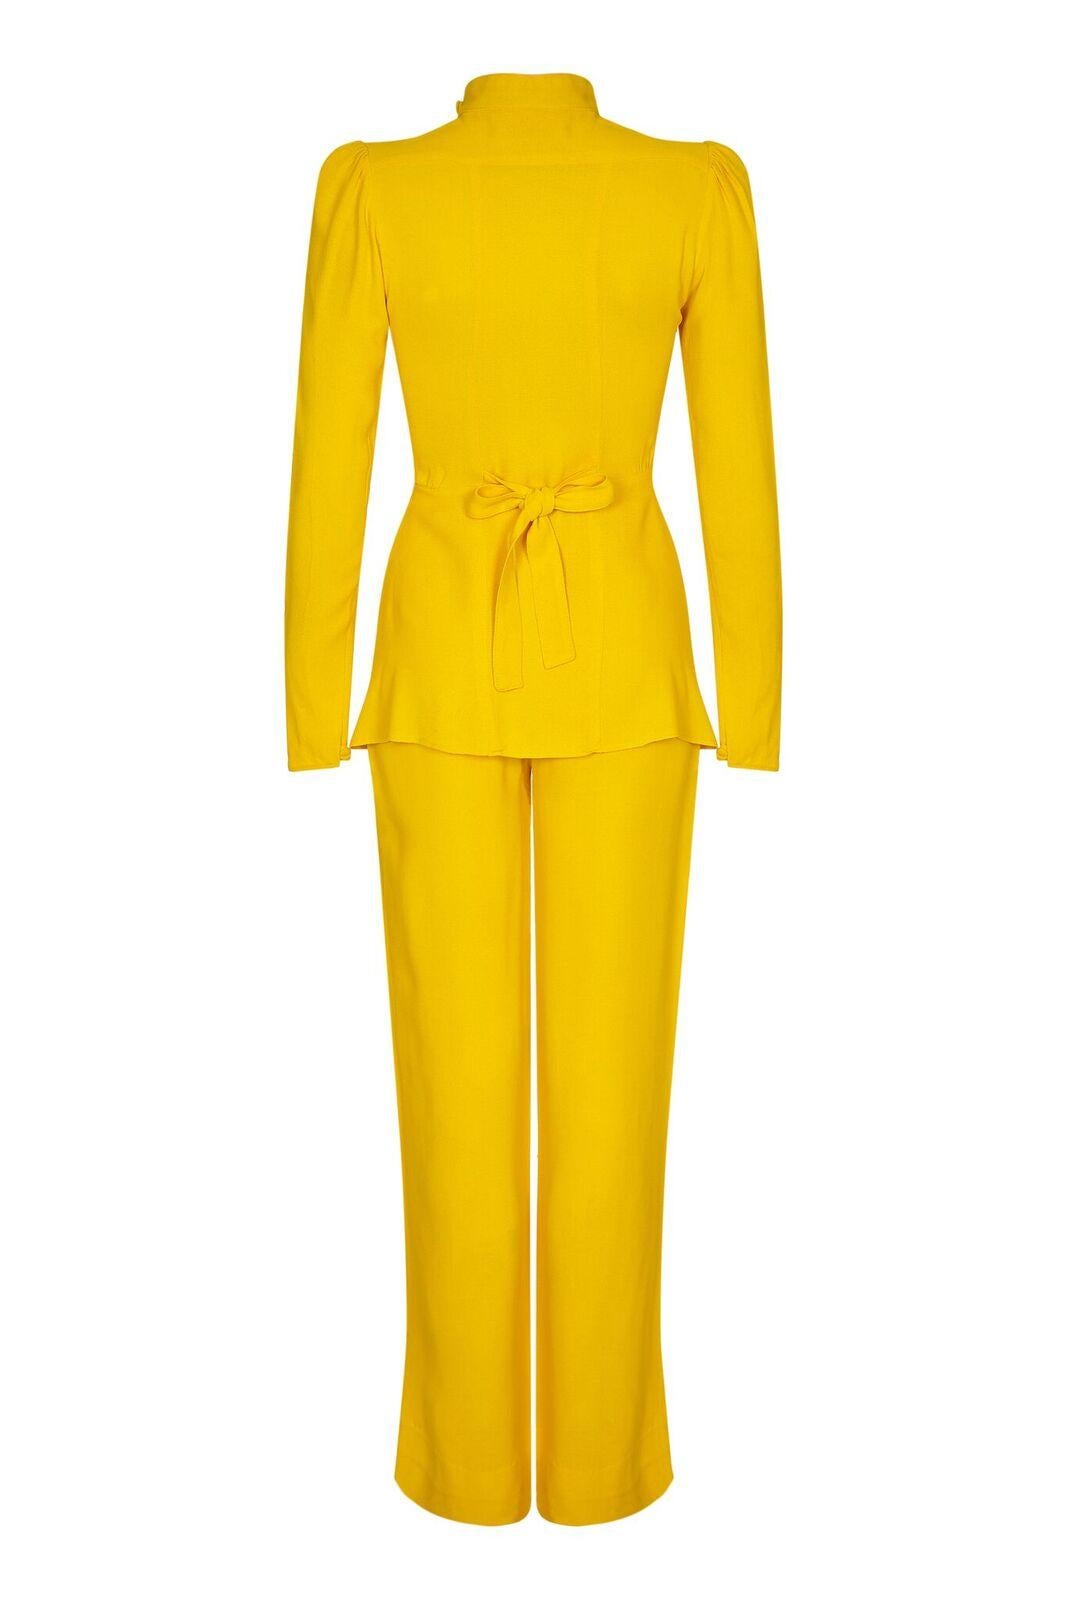 This exuberant 1970s moss crepe trouser set in canary yellow is by Ossie Clark for Radley, and showcases the designers celebrated flare for flowing lines and desirable silhouettes. Both separates are in super vintage condition and the colour has